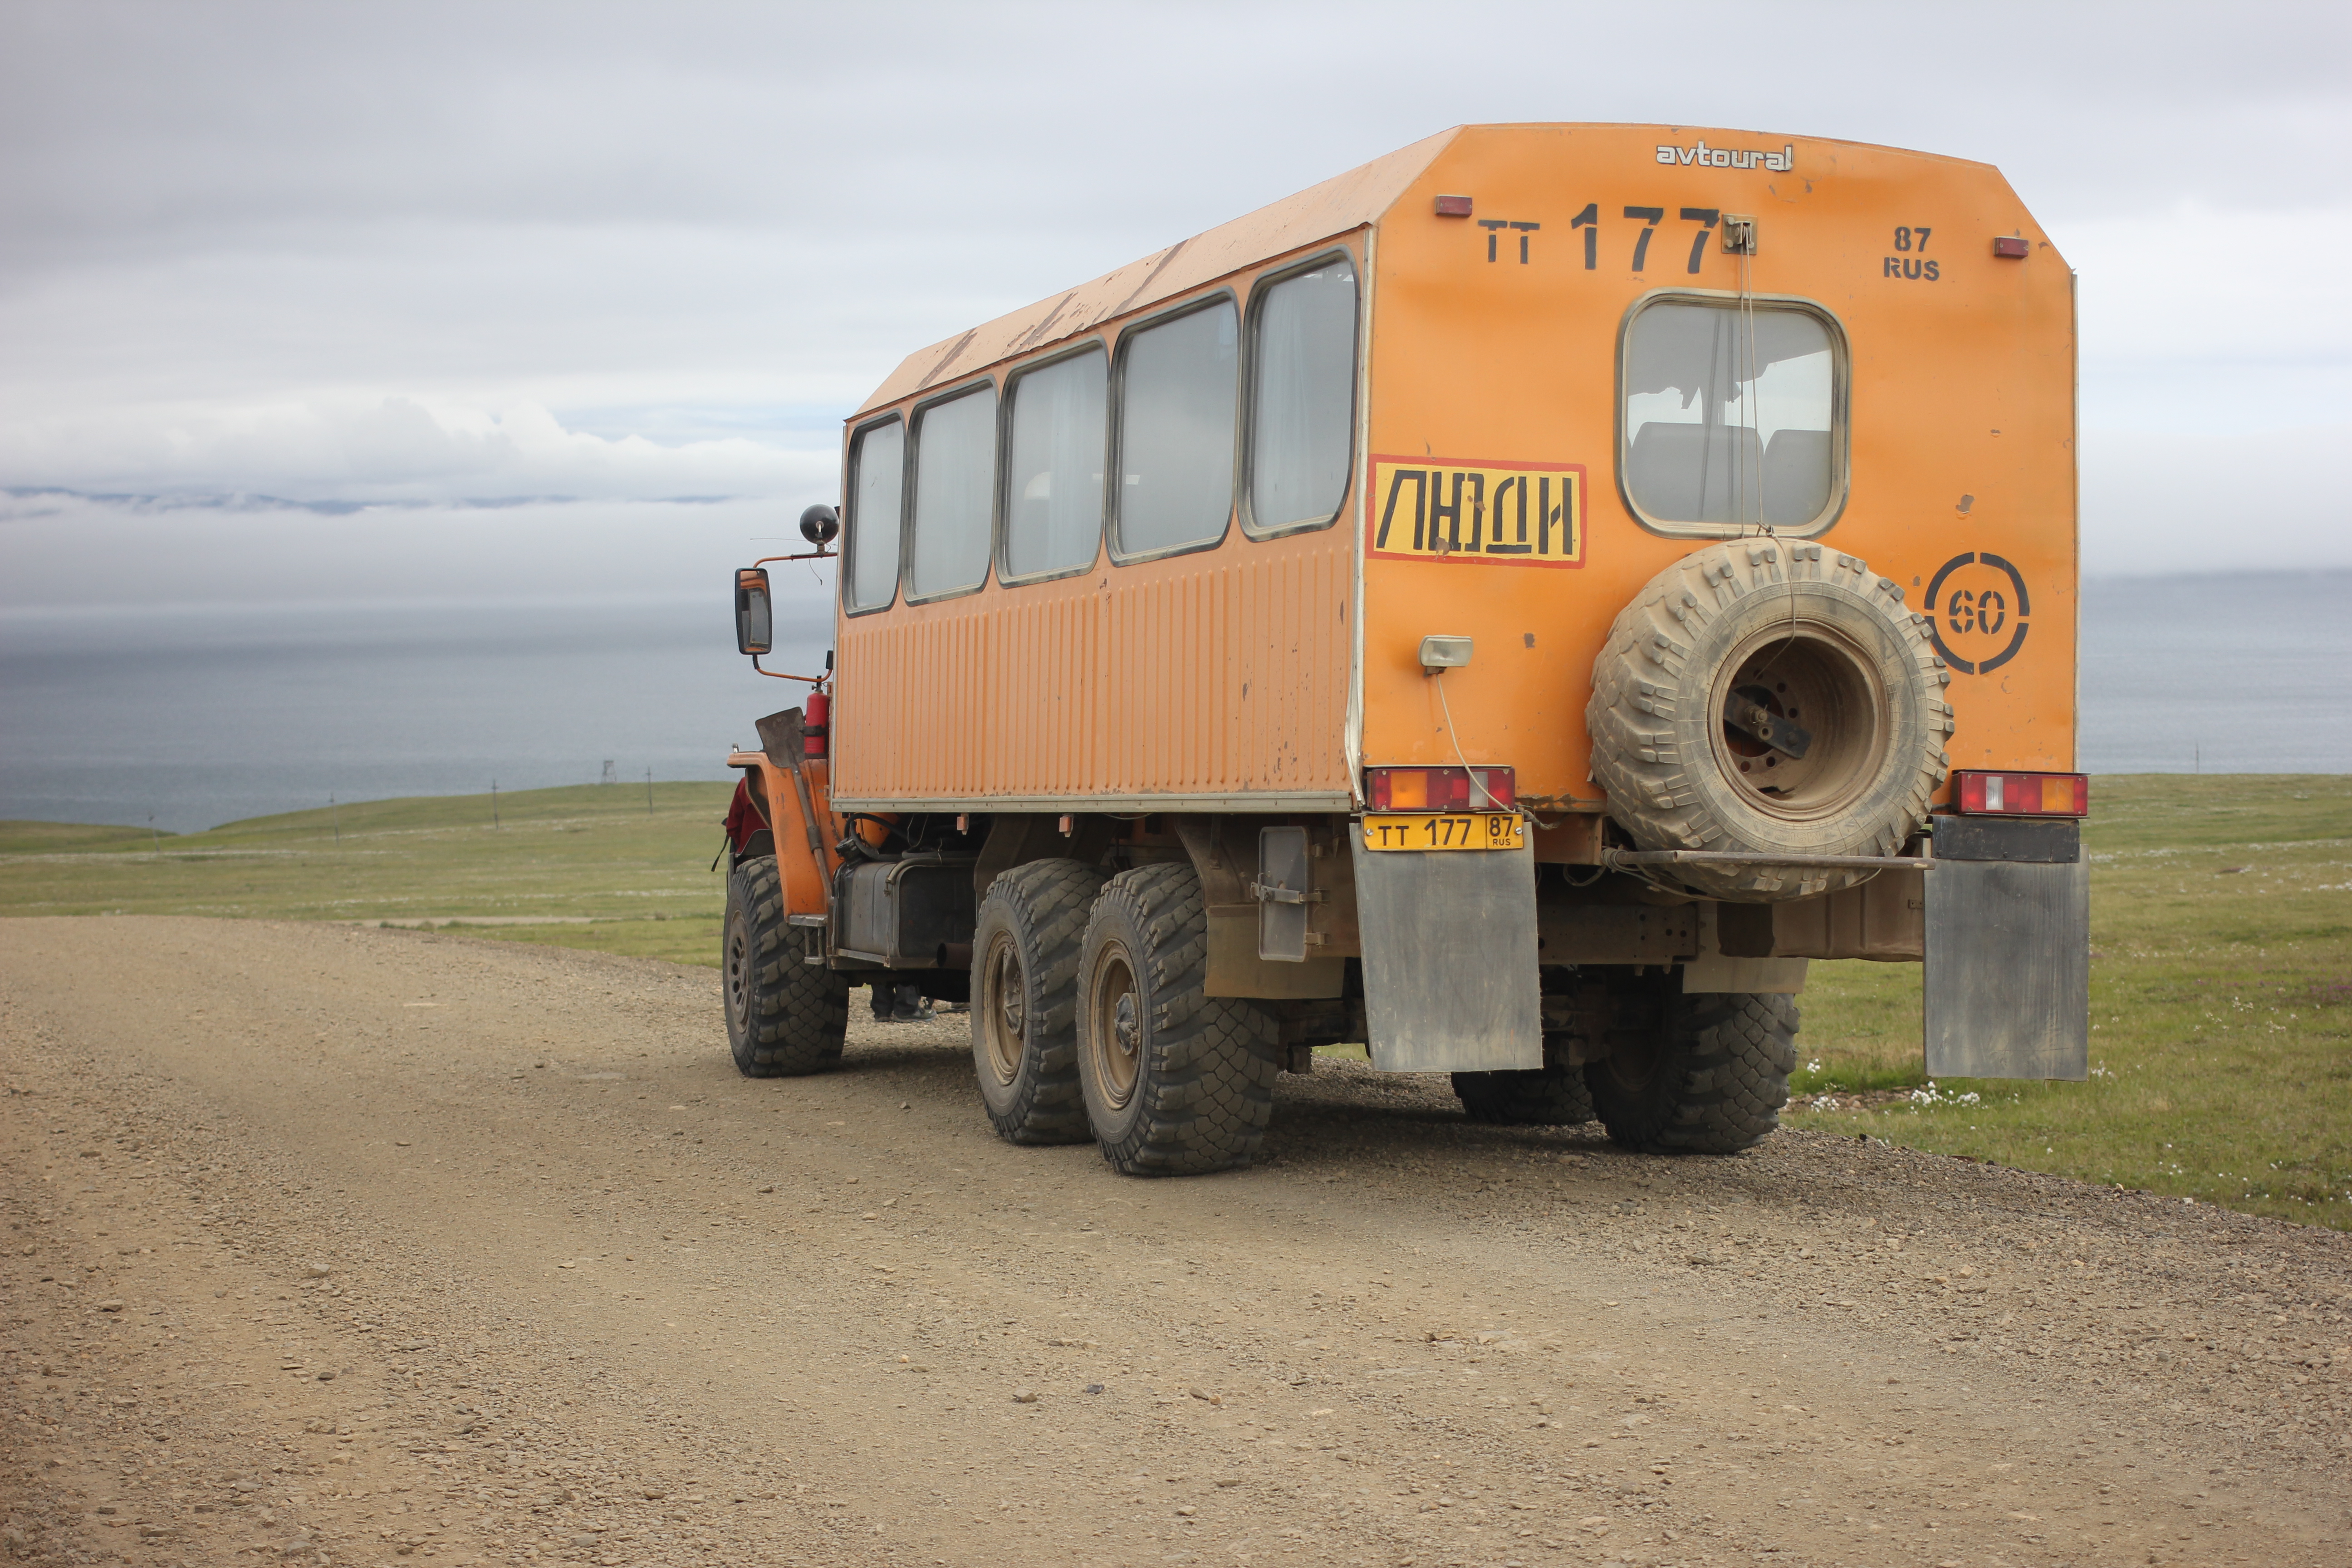 The six-wheel bus that travels between Lorino and Lavrentiya, Chukotka, July 2016. Roads in the region are rare and mostly unpaved, making overland travel difficult on all but the largest tires. (Kirsten Swann / Alaska Dispatch News)